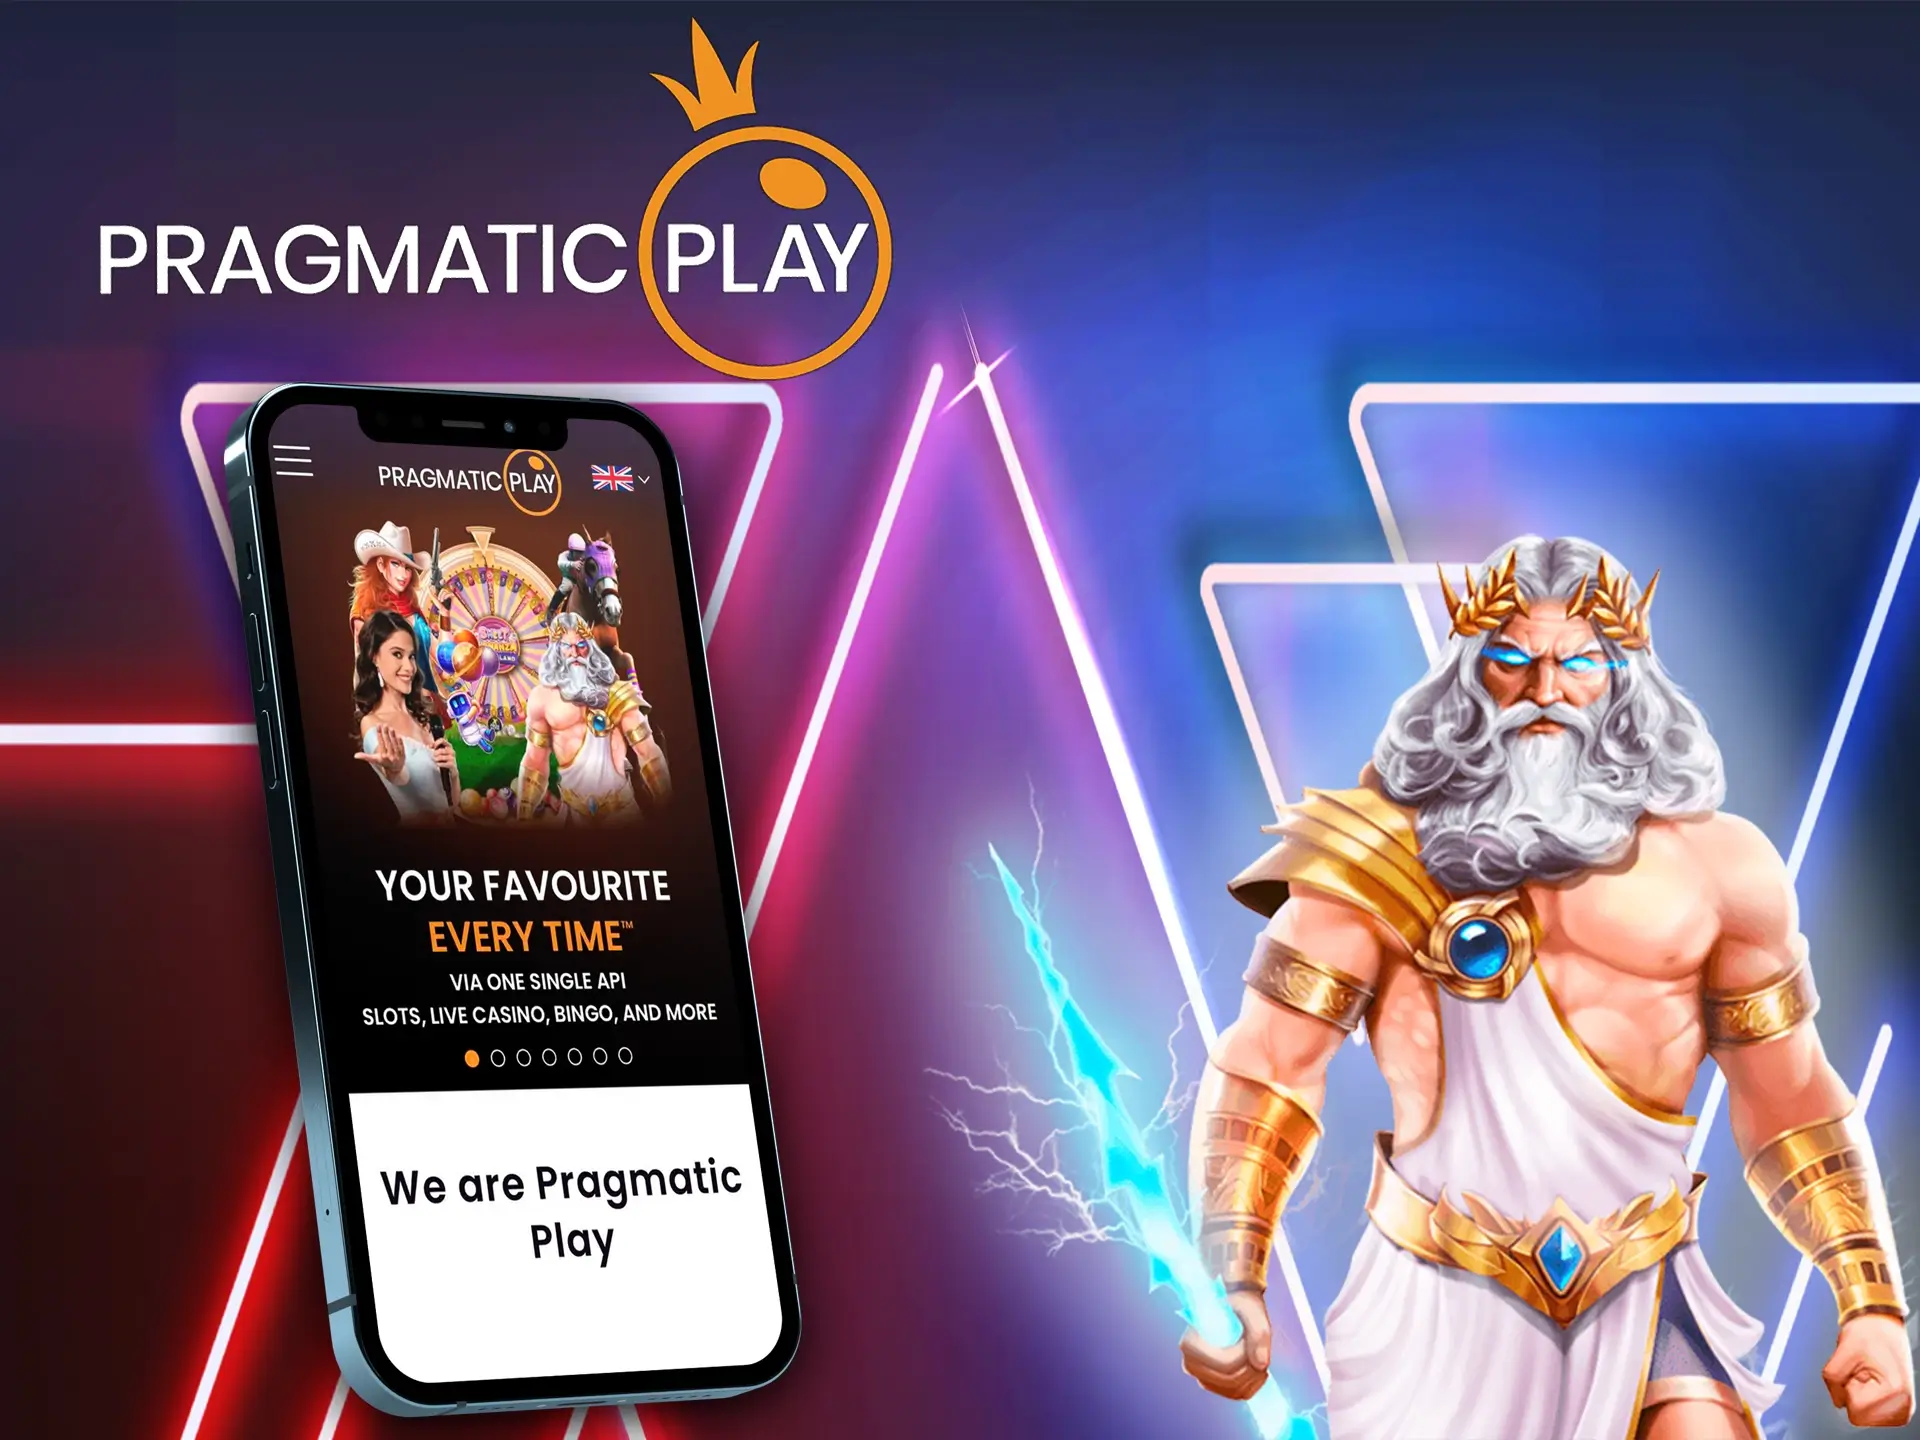 Familiarize yourself with Pragmatic Play games before start playing.